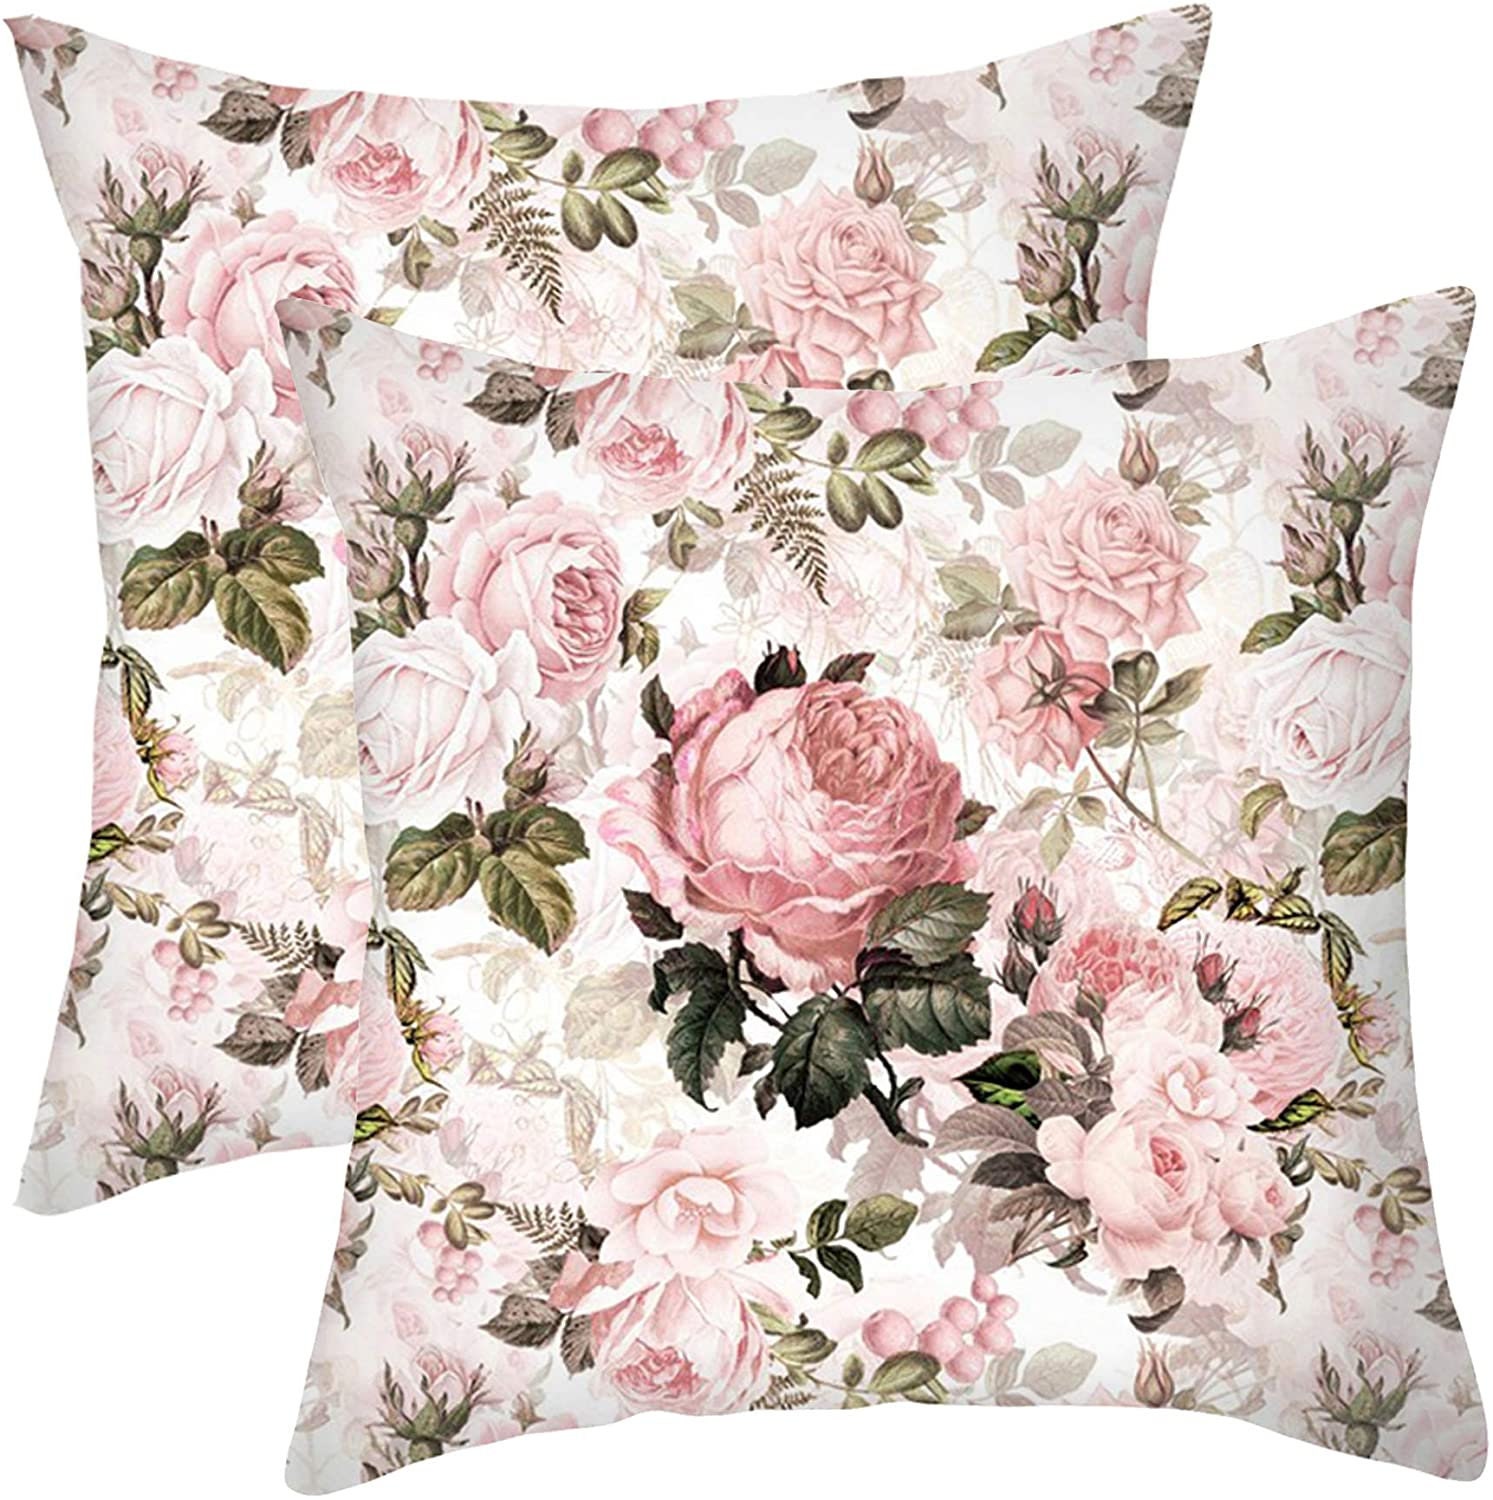 set of 2  floral camera books cushion cover decorative pillows 